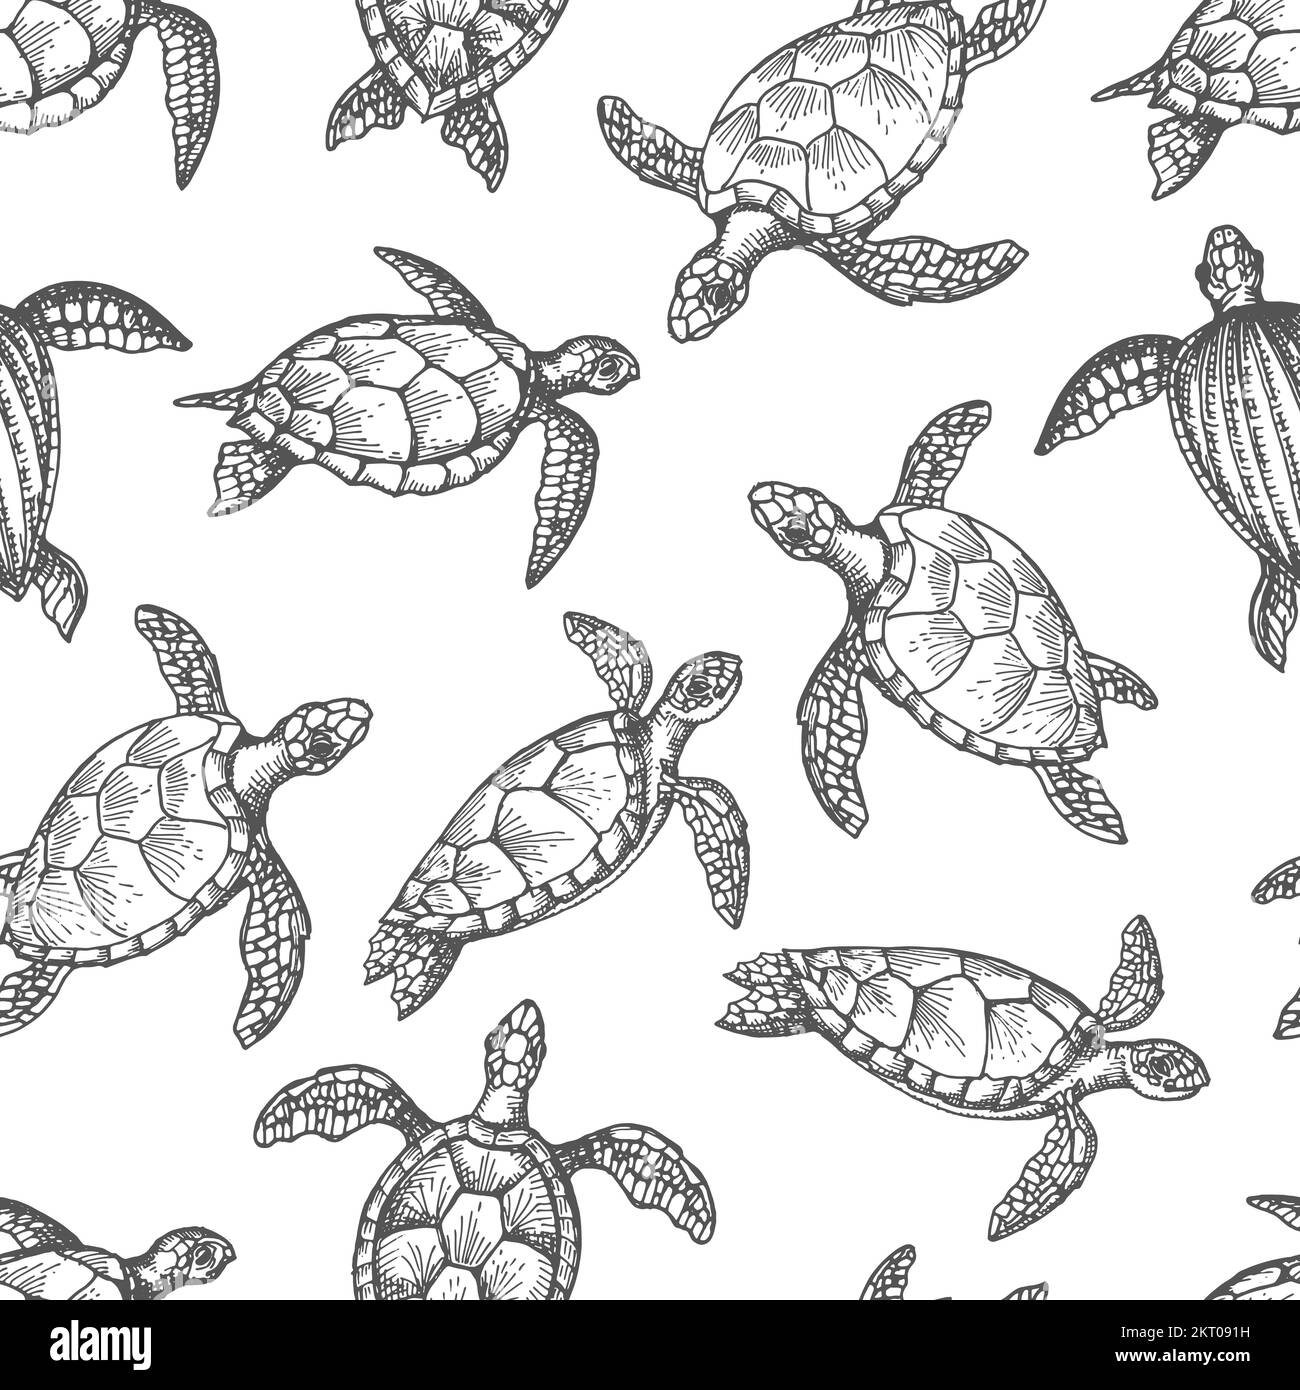 Turtle reptile sketches seamless pattern of marine animals and land reptiles. Vector background of sea turtles, terrapins and tortoises with shells, f Stock Vector